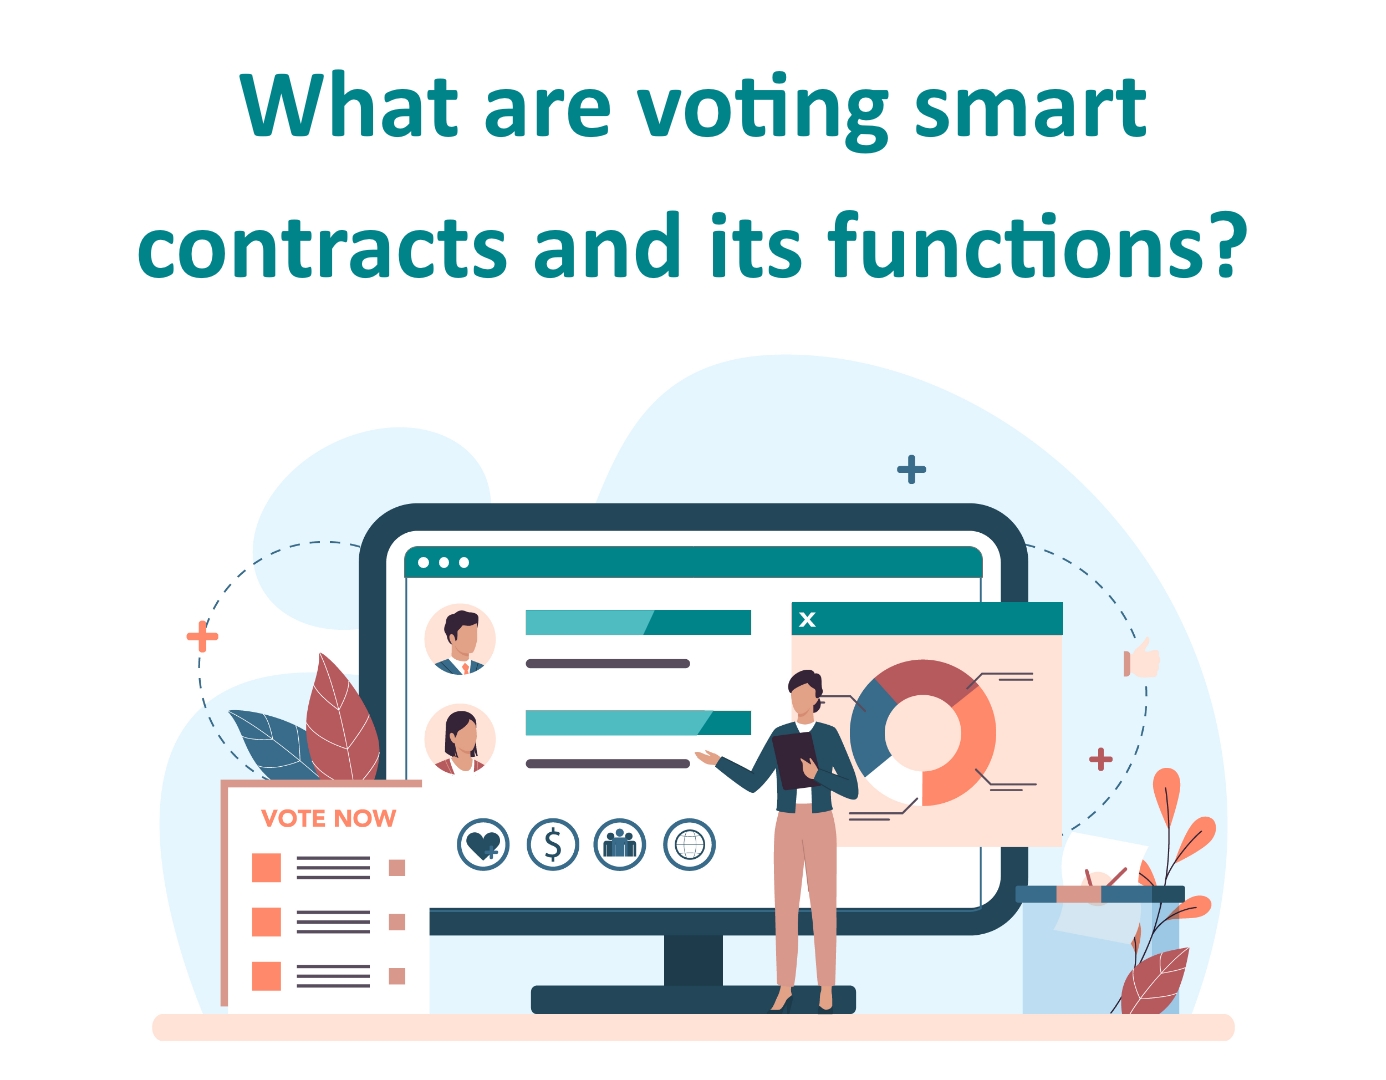 What are voting smart contracts and its functions?